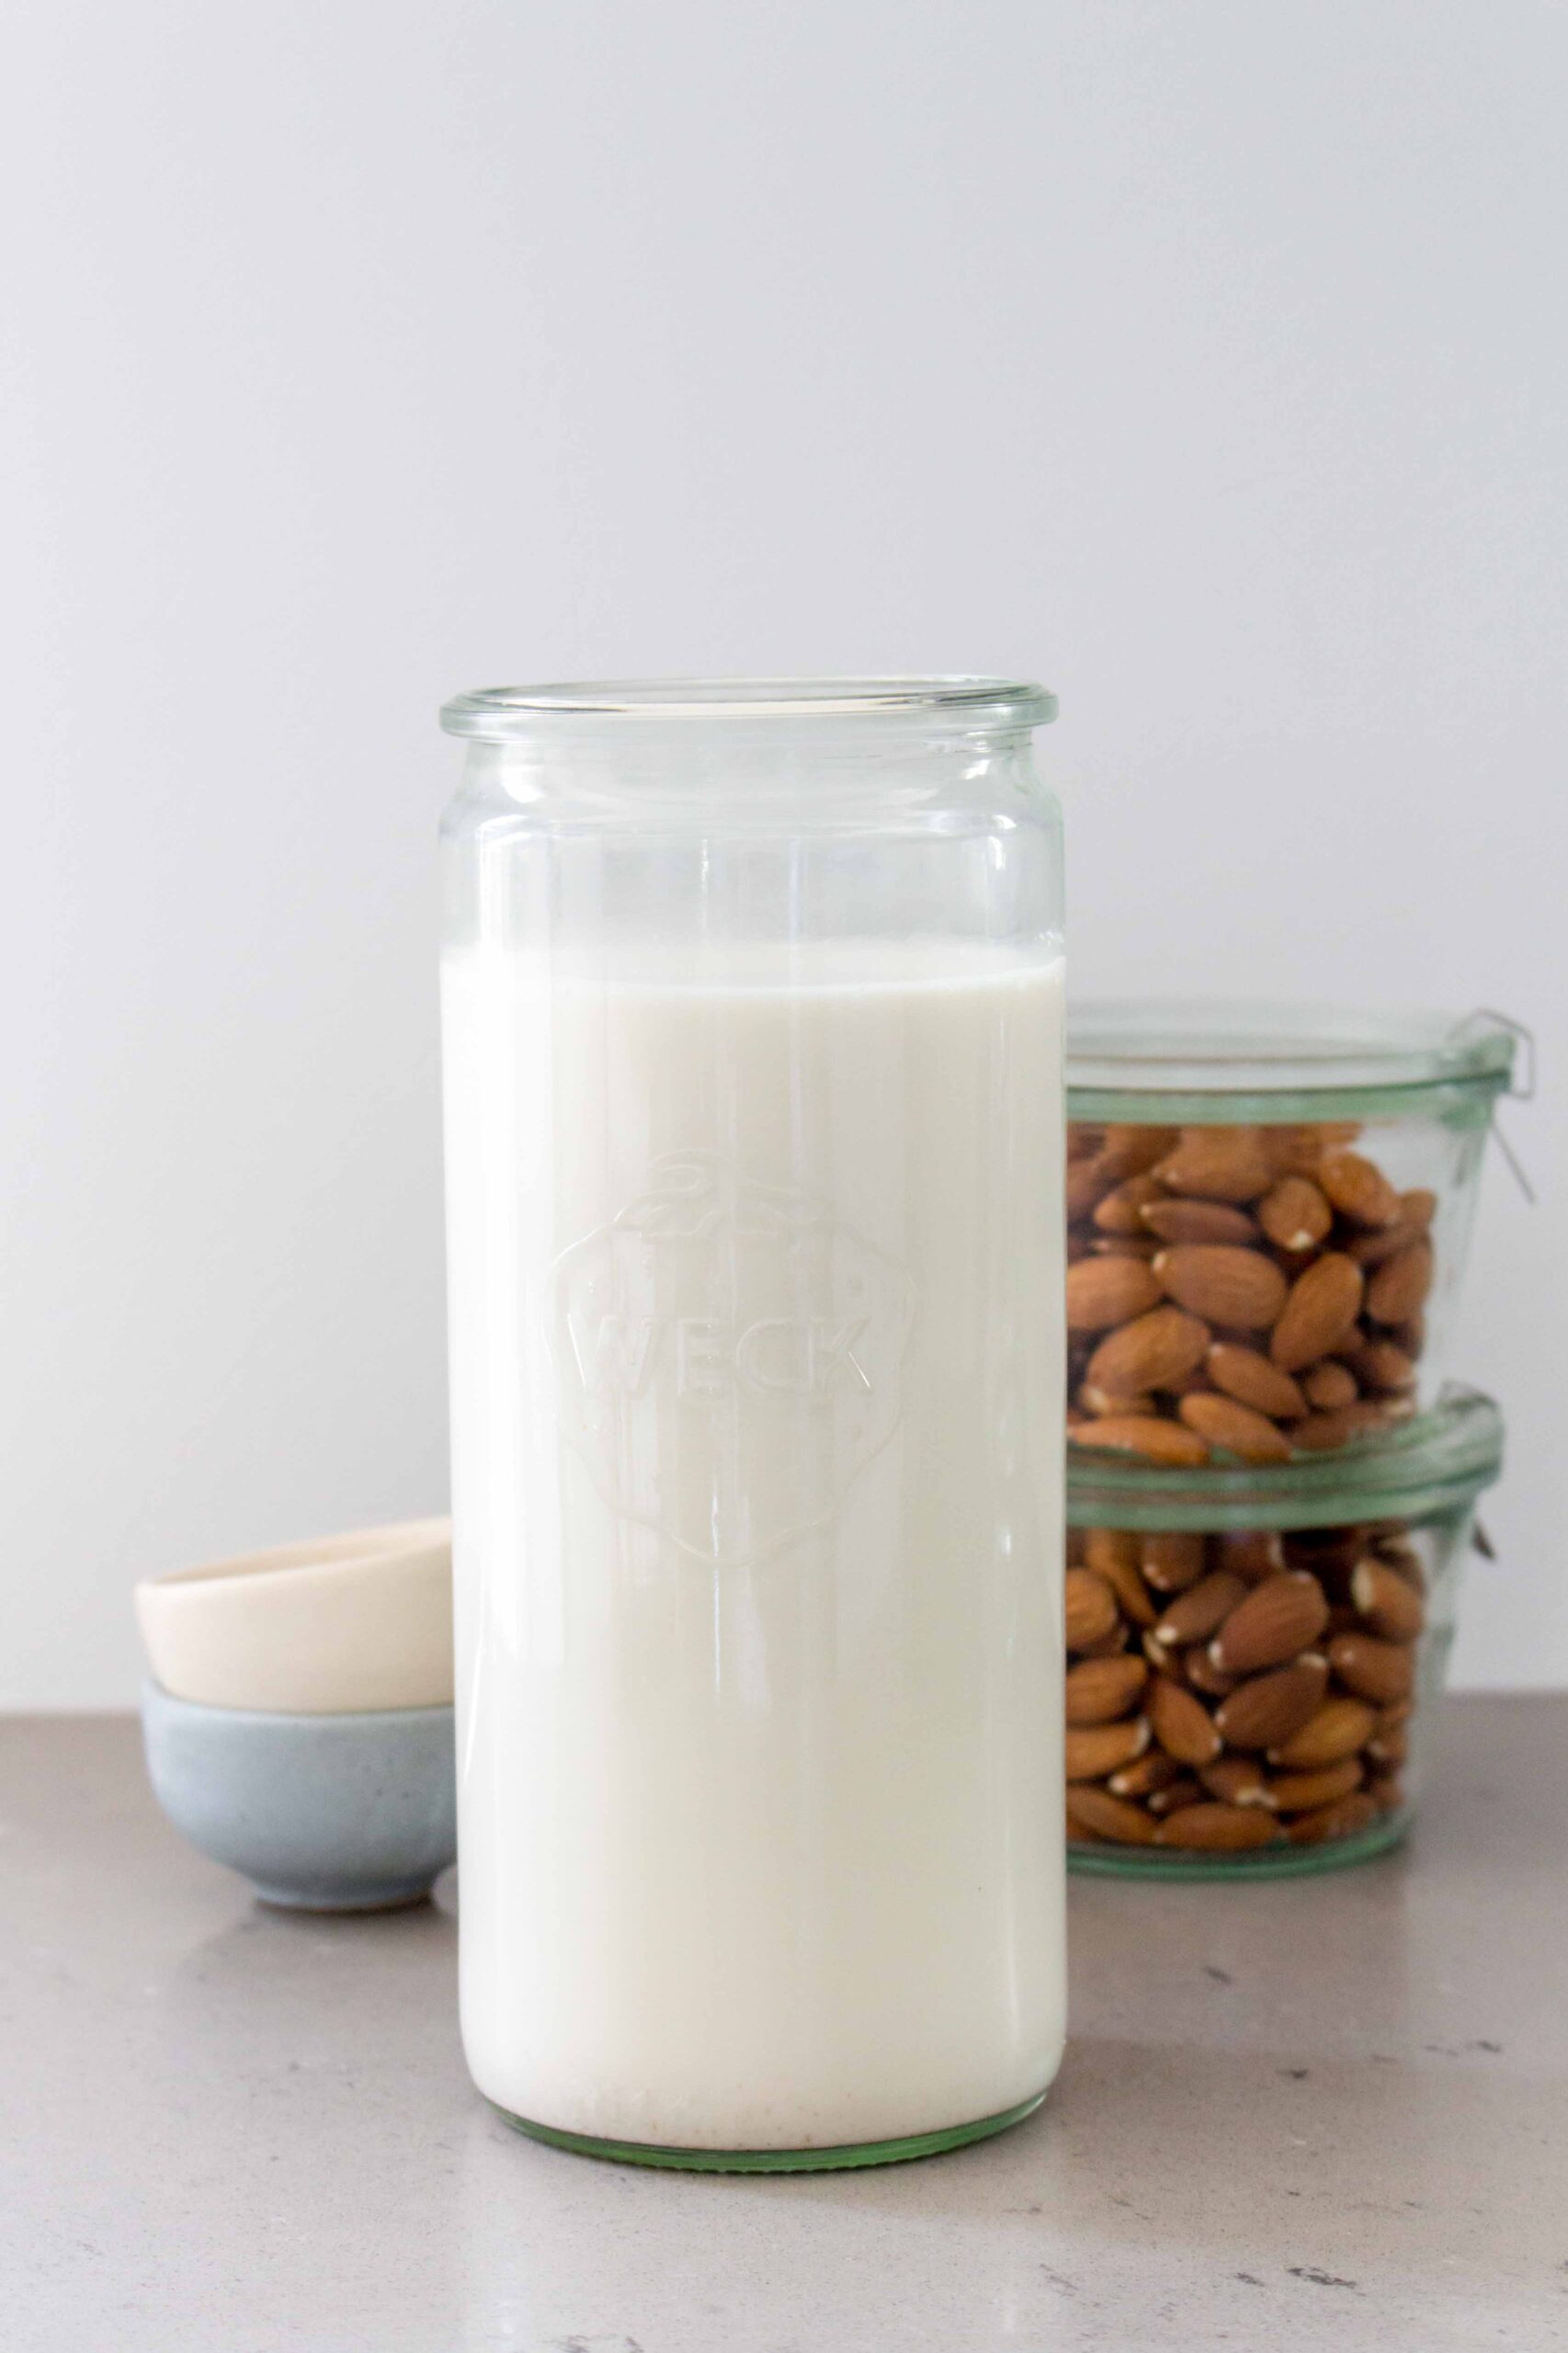 https://www.cookinwithmima.com/wp-content/uploads/2020/09/almond-milk-mima-8-scaled.jpg